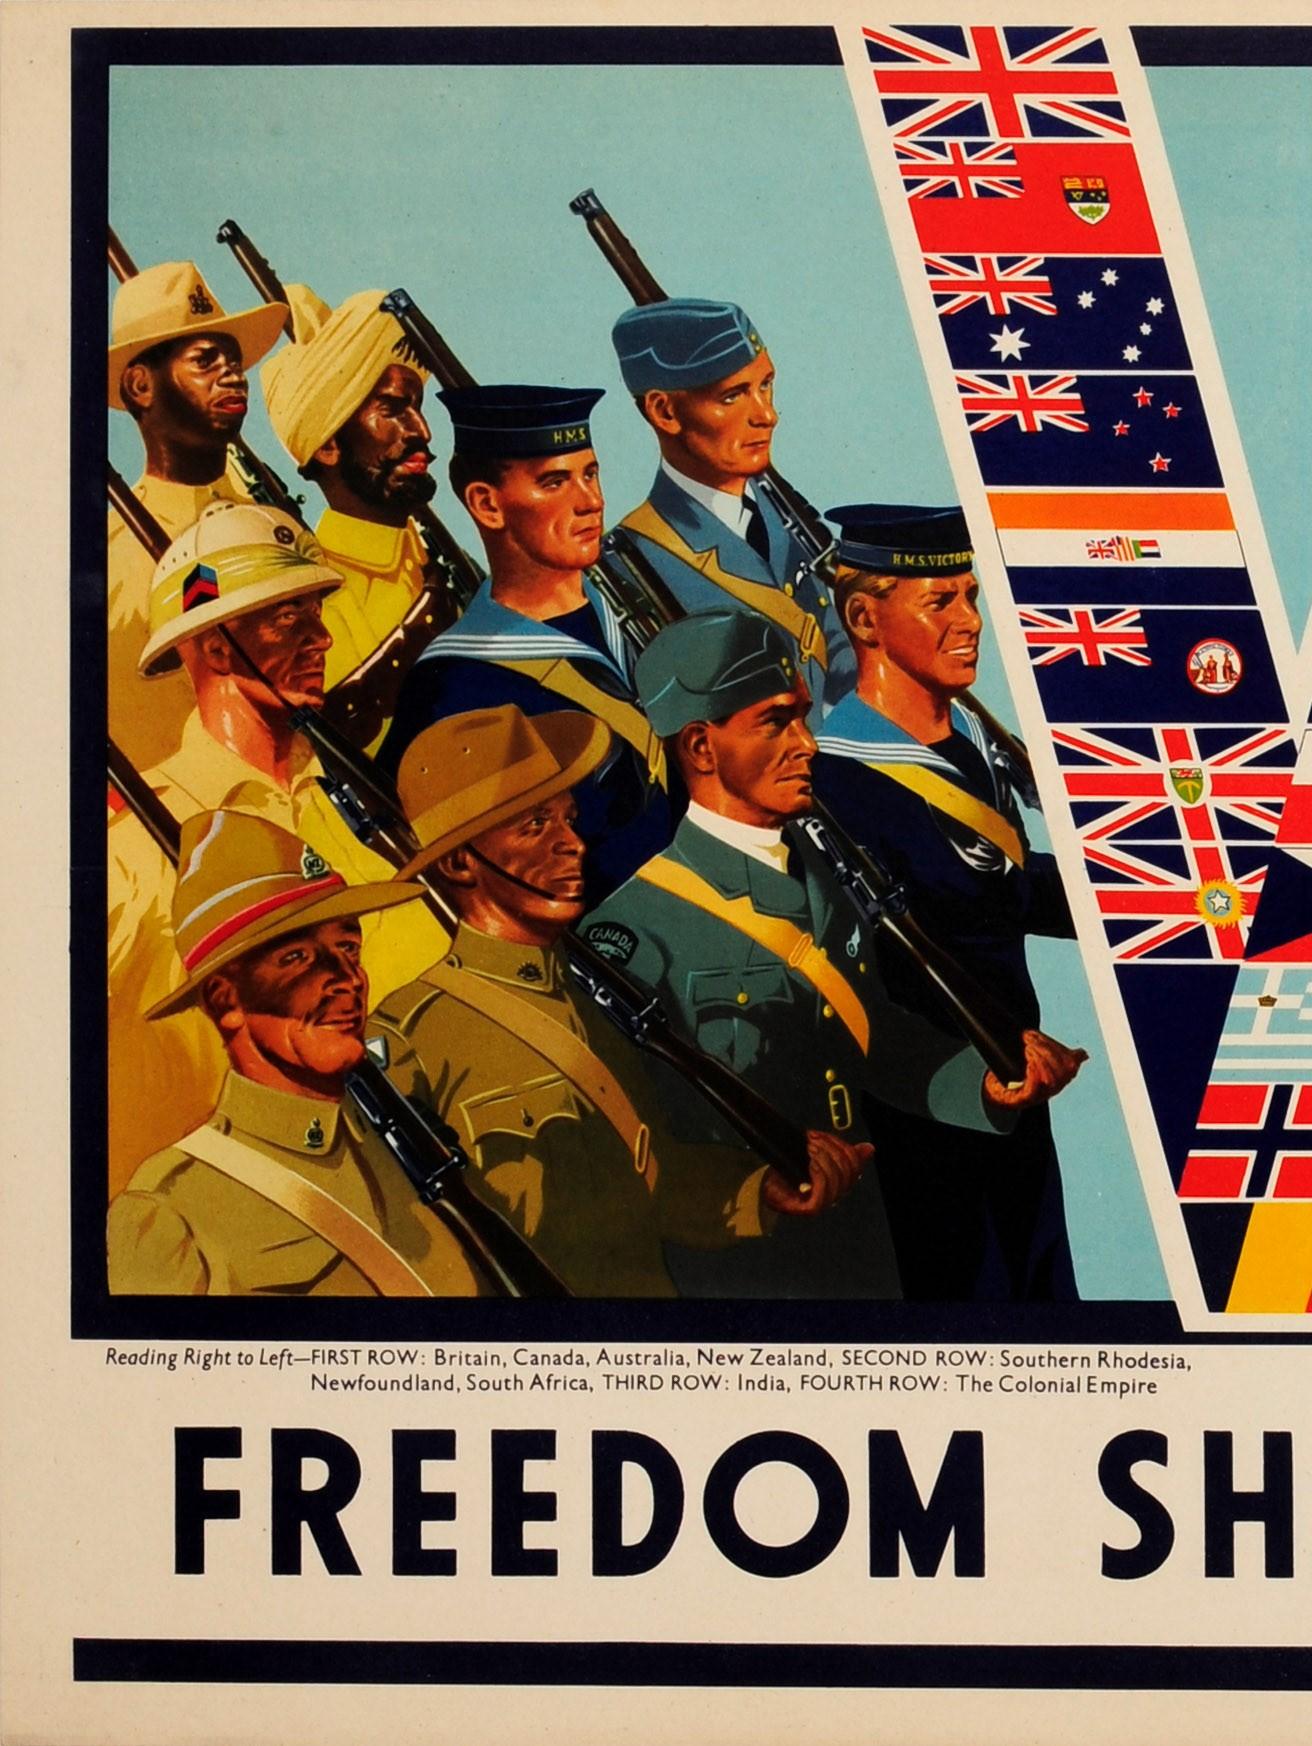 Original 1940s World War Two Poster Freedom Shall Prevail Allies Victory V Flags - Print by Unknown